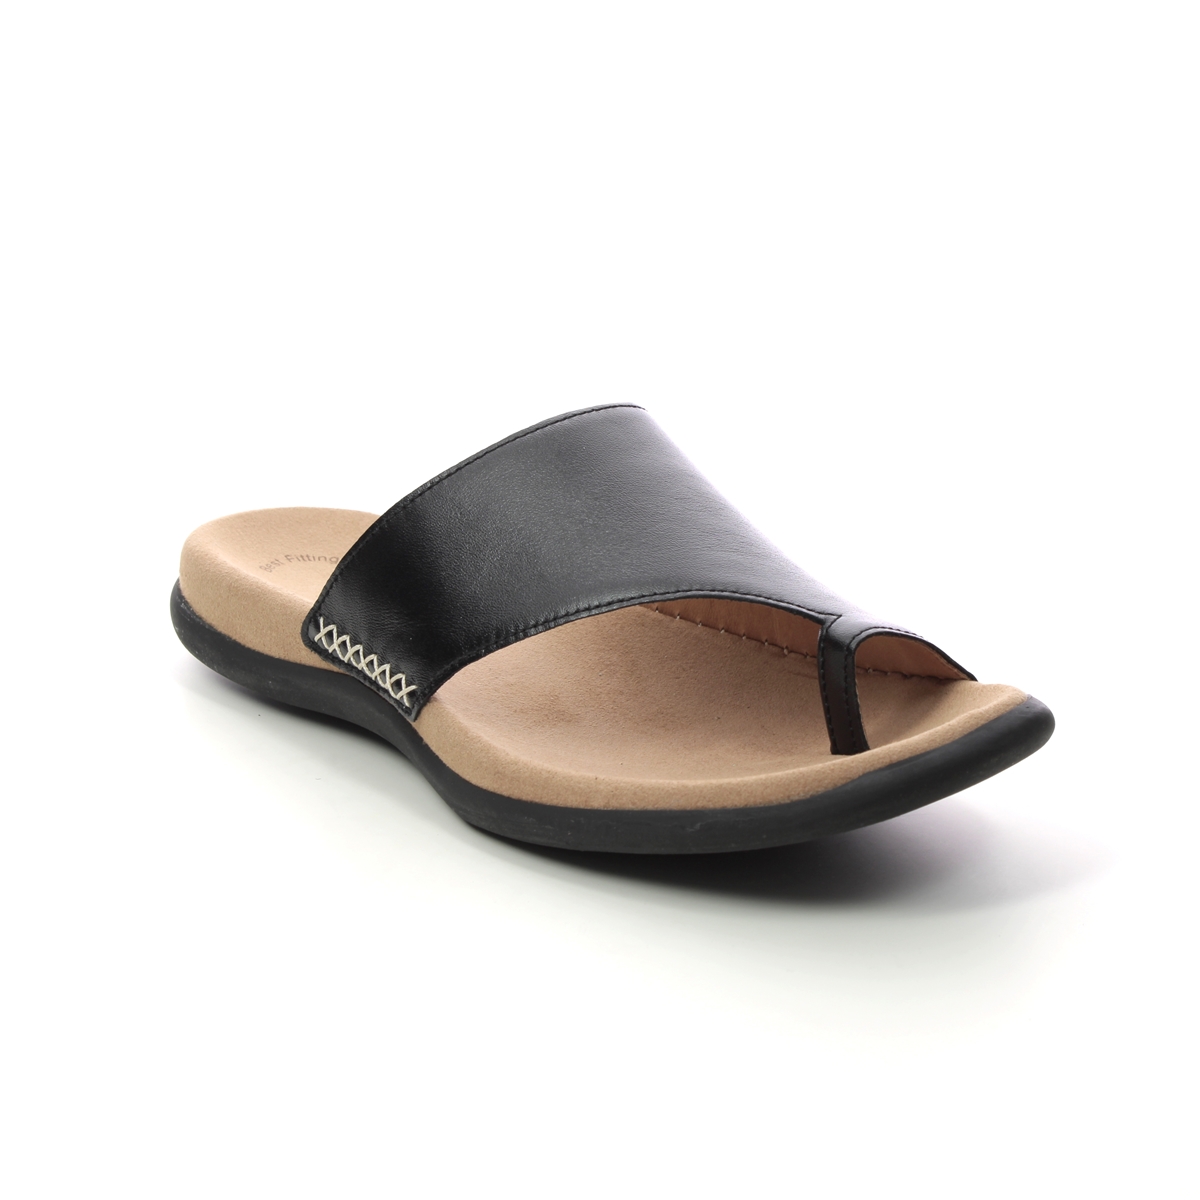 Gabor Lanzarote Black Womens Toe Post Sandals 03.700.27 in a Plain Leather in Size 40